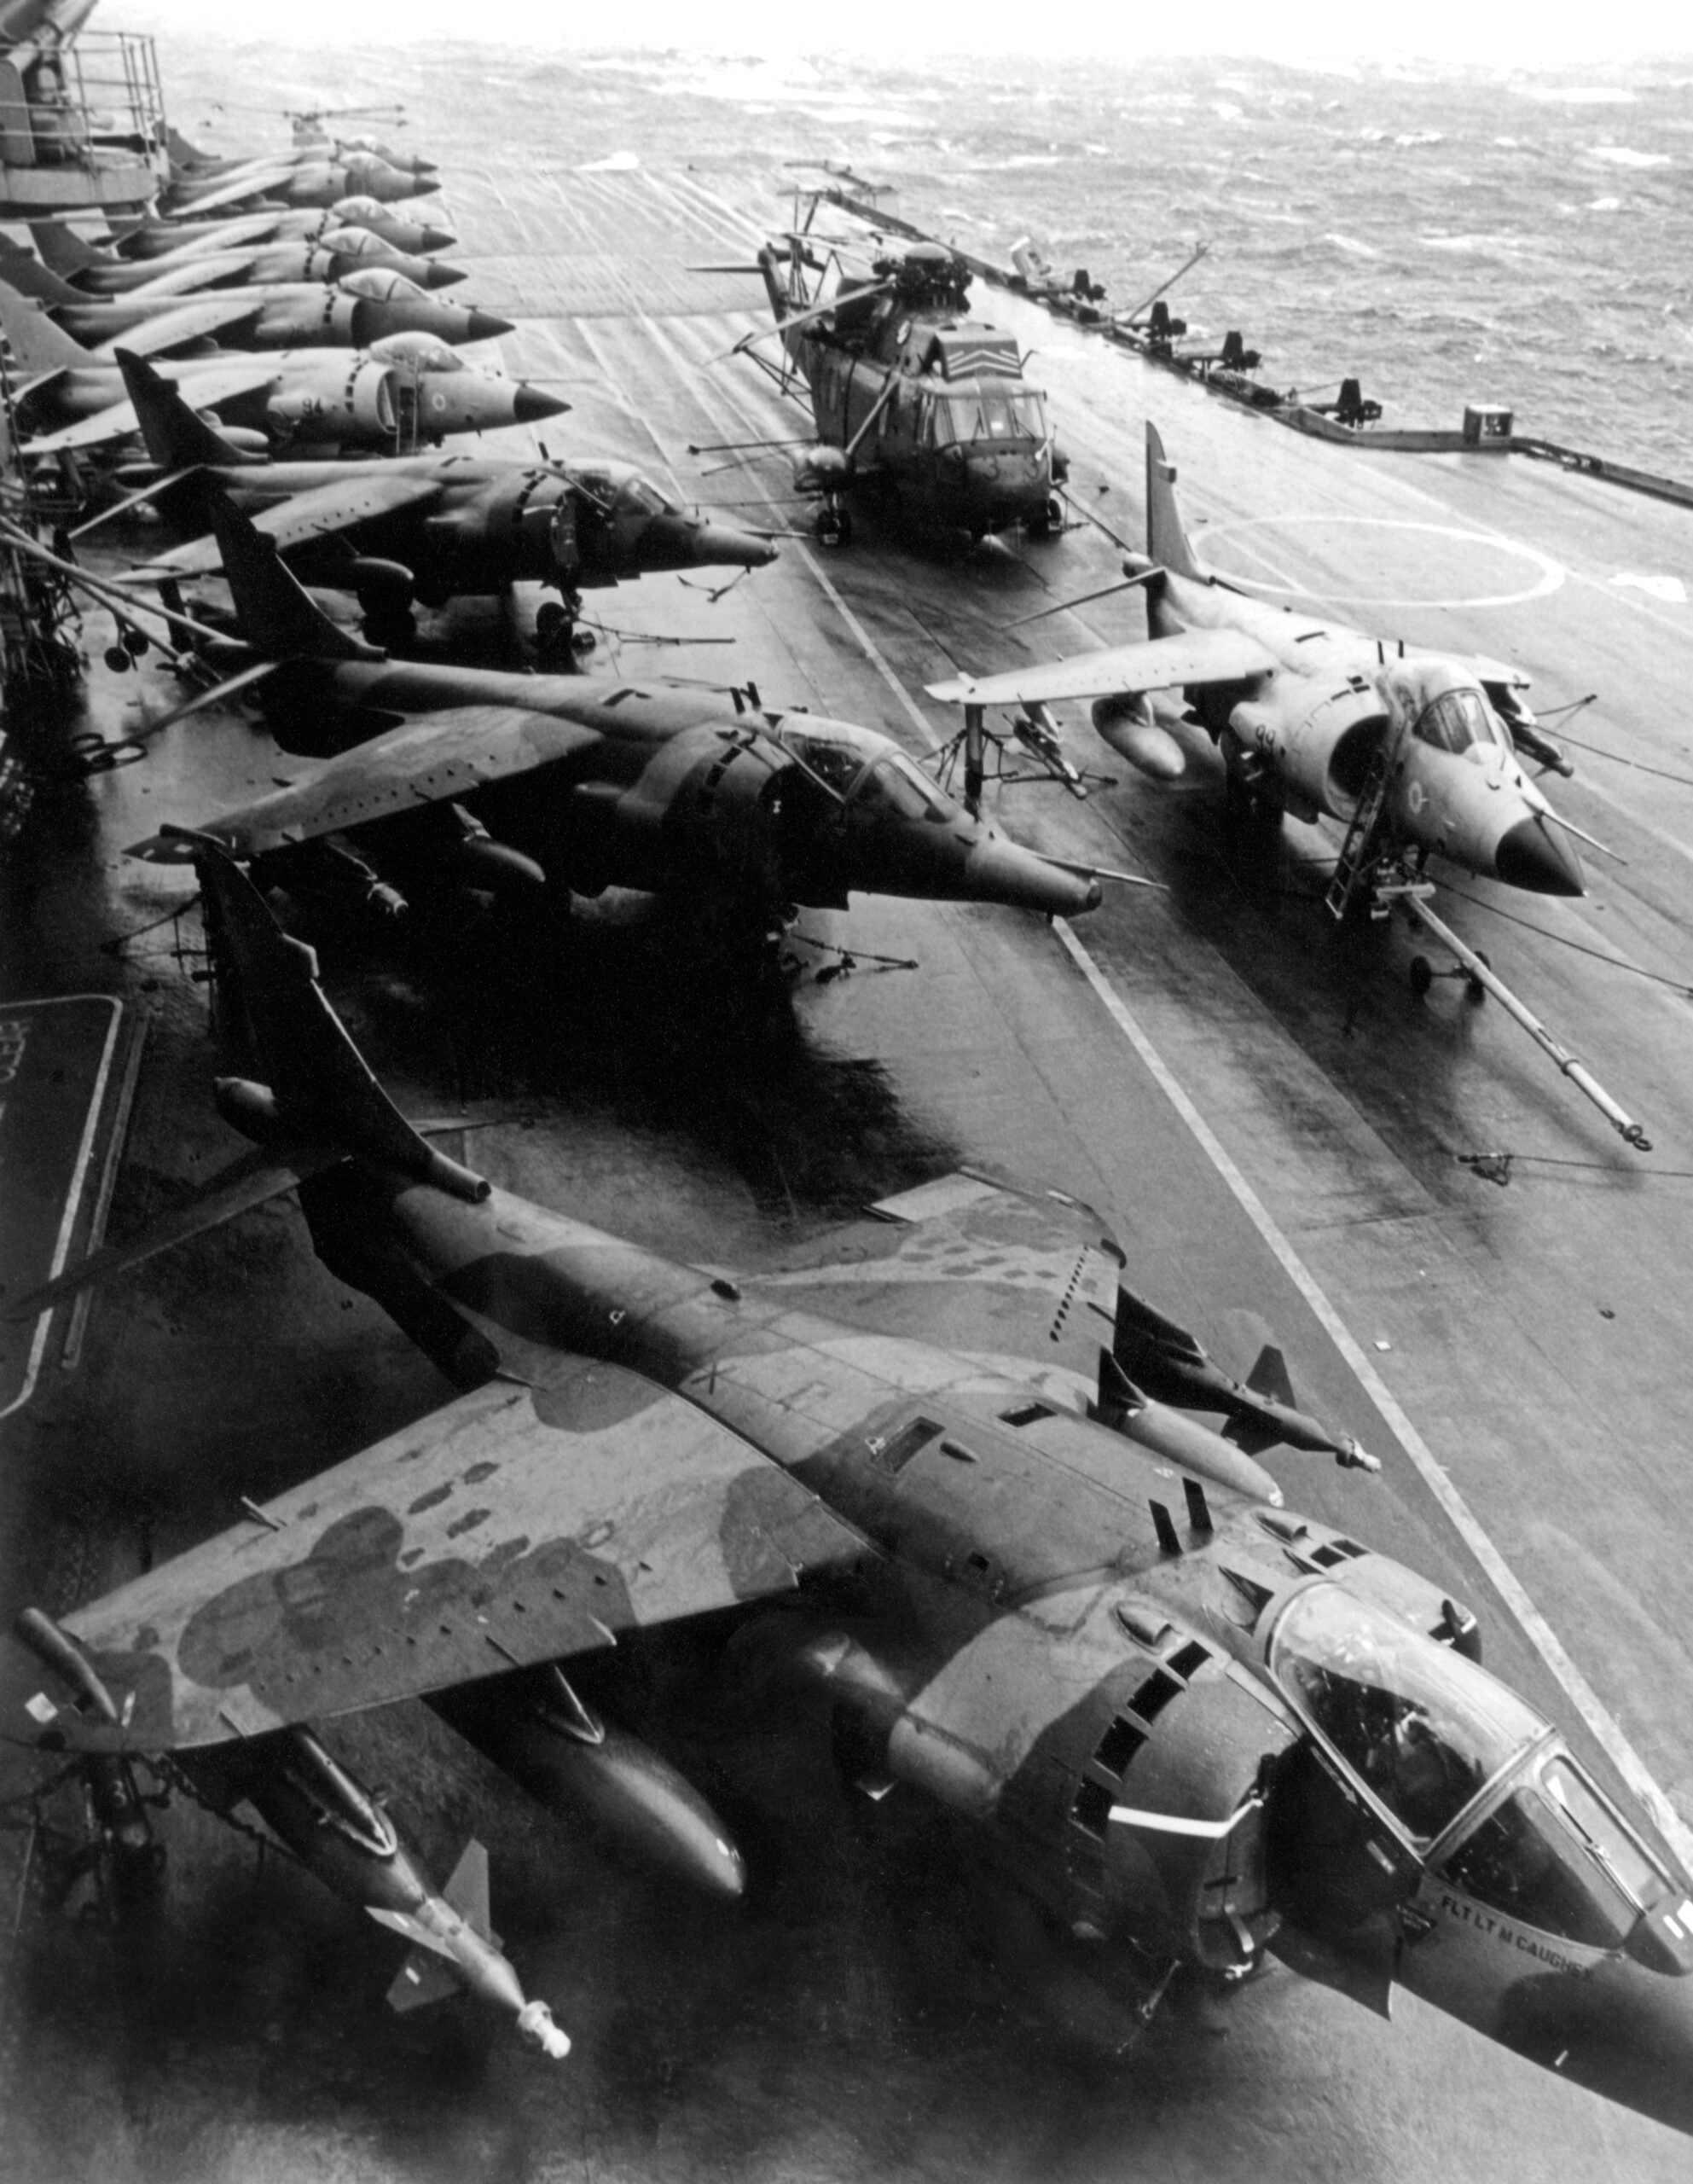 Harrier GR.3 aircraft of 1 Squadron parked alongside Royal Navy Sea Harriers and a Sea King helicopter on the flight deck of HMS Hermes on 19 May 1982, the day that 1 Squadron joined with Hermes in the South Atlantic.

The Sea Harrier FRS.1 differed from the RAF's  GR.3 in having extensive corrosion-proofing, a cockpit that was raised to provide the pilot with a better view, and a multi-mode radar called Blue Fox, which could search for targets in the air or on the sea. 

*Some of these images have had some dodging and burning done and have been retouched to remove detritus and dust and scratch marks only*